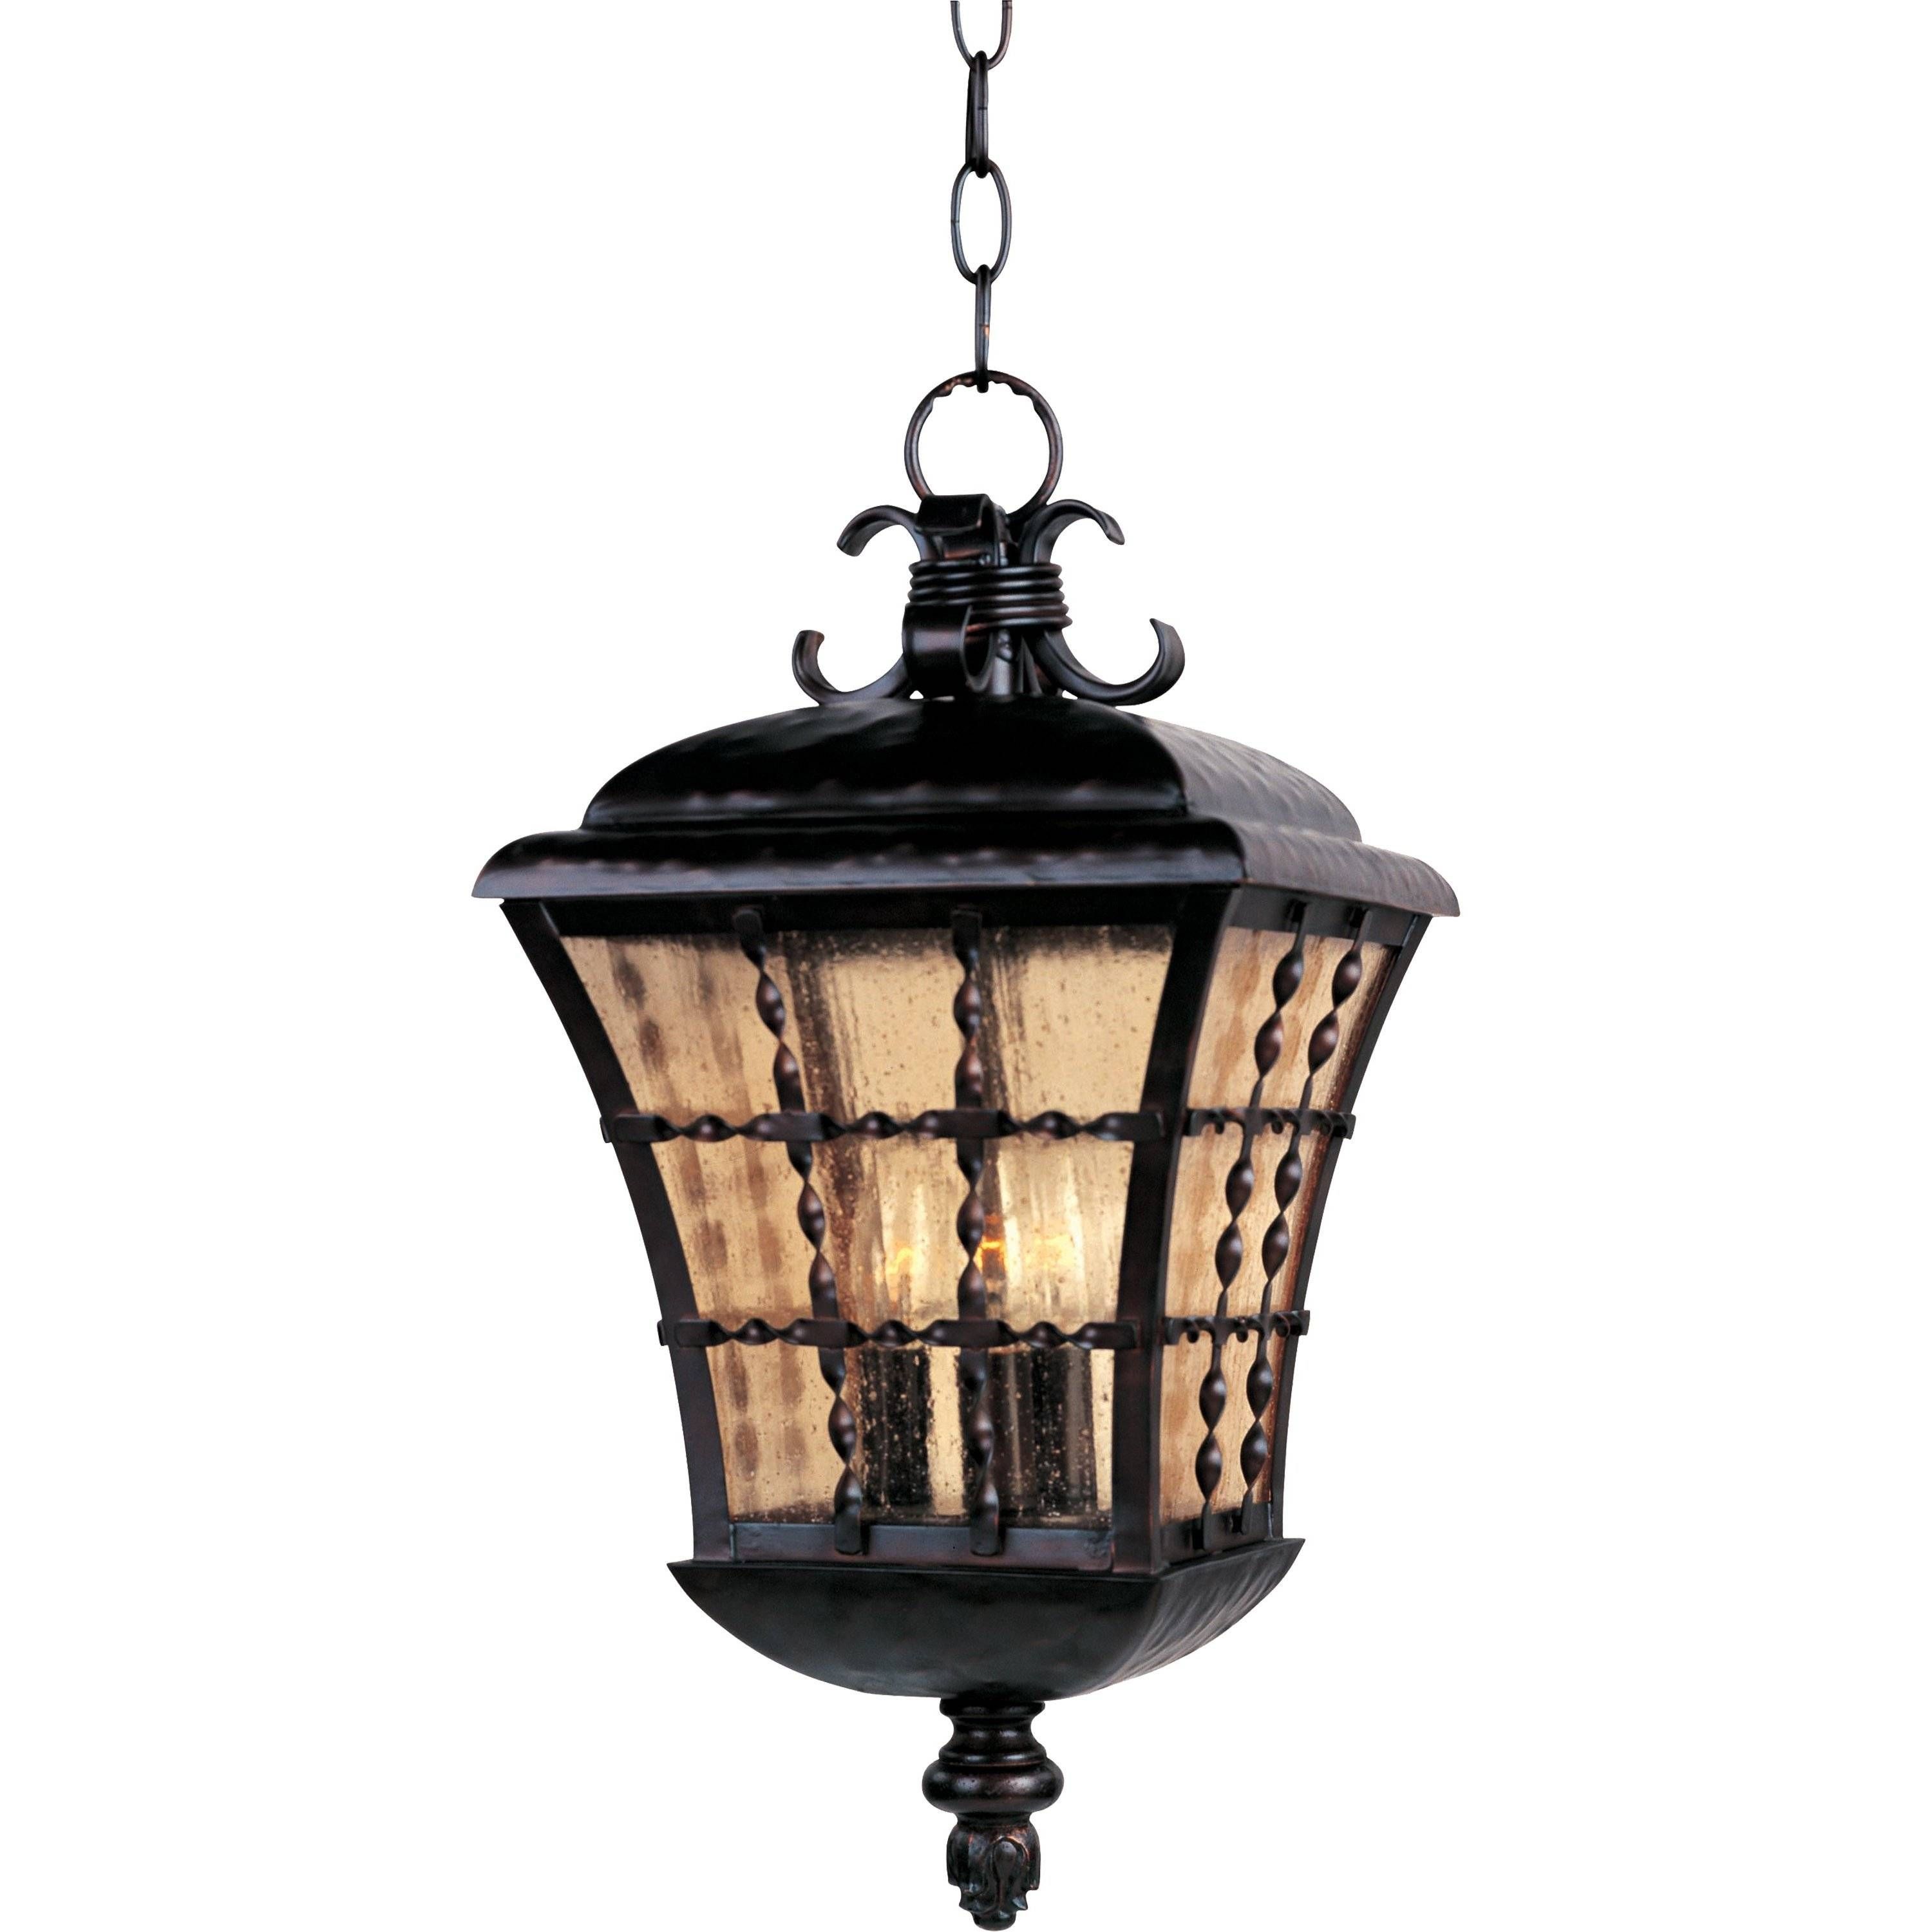 Exterior Hanging Lighting Types And Uses Best Architecture With Exterior Pendant Lighting Fixtures 